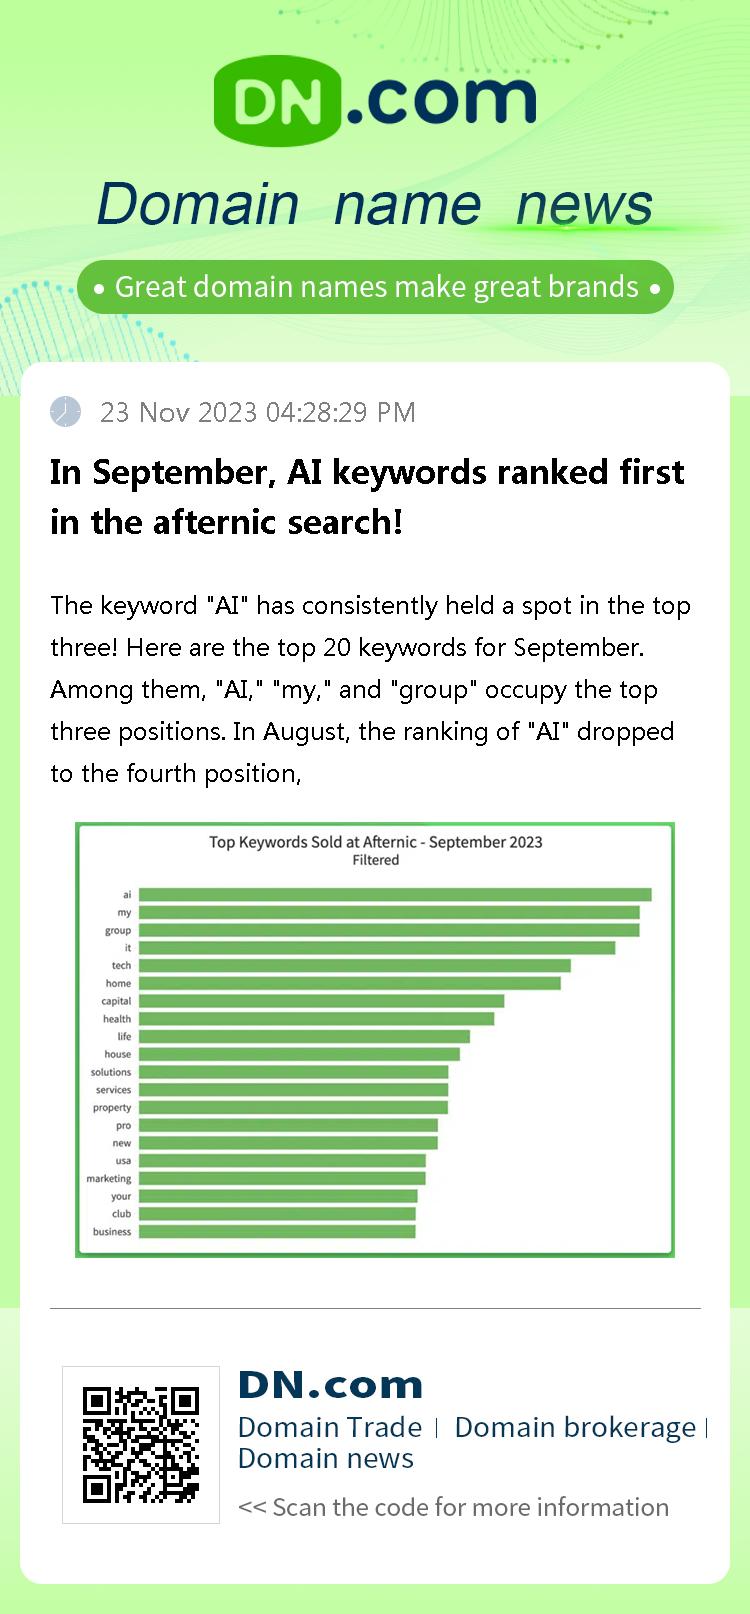 In September, AI keywords ranked first in the afternic search!